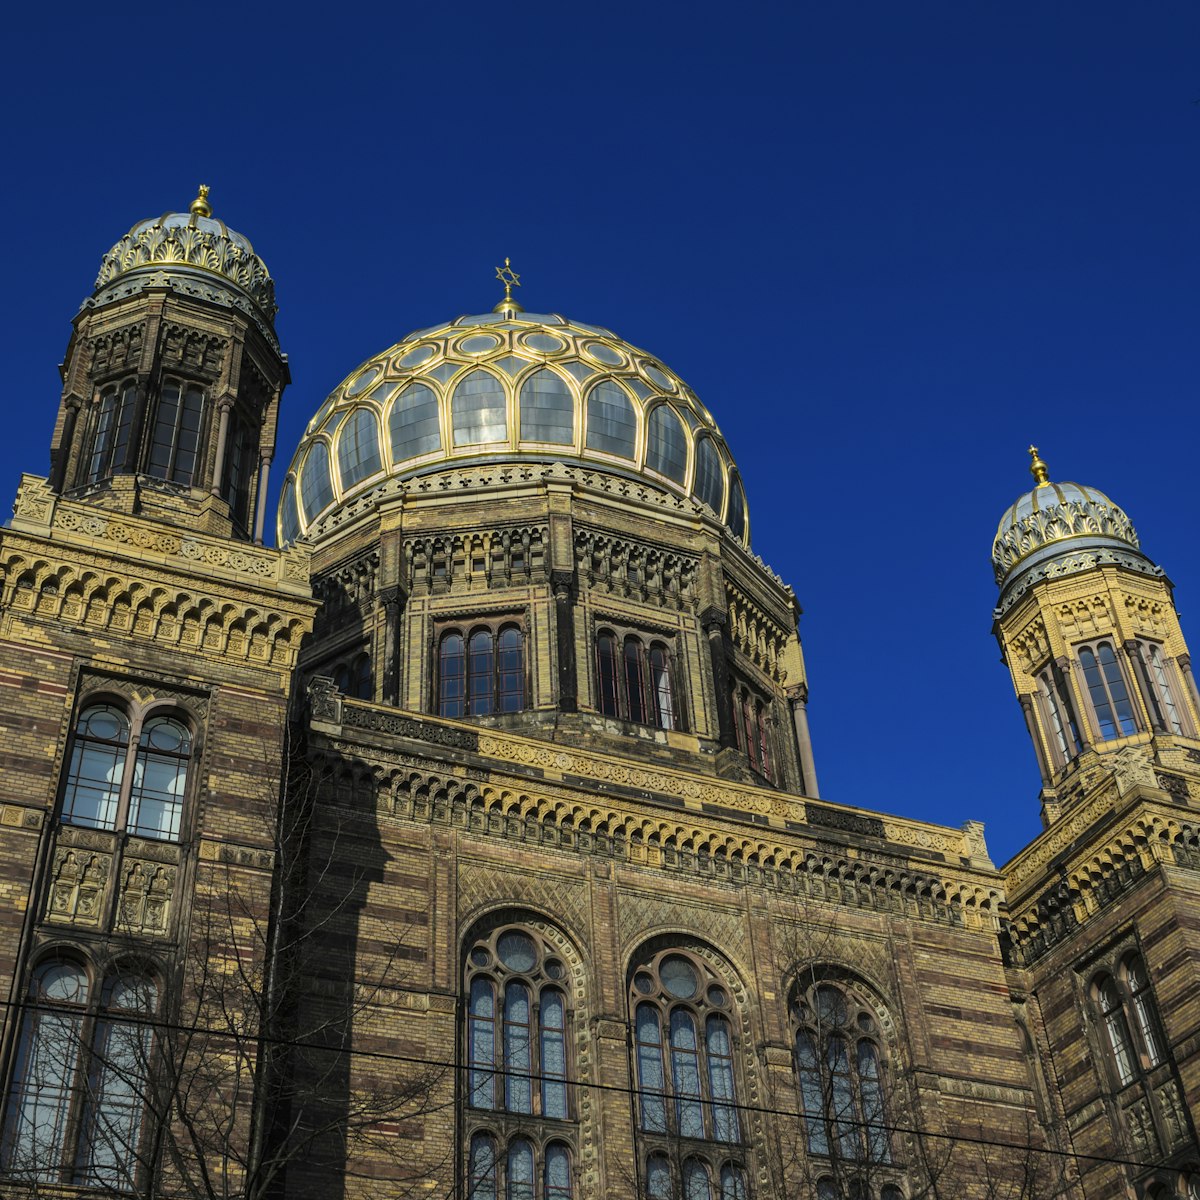 New Synagogue Berlin, built in 1886